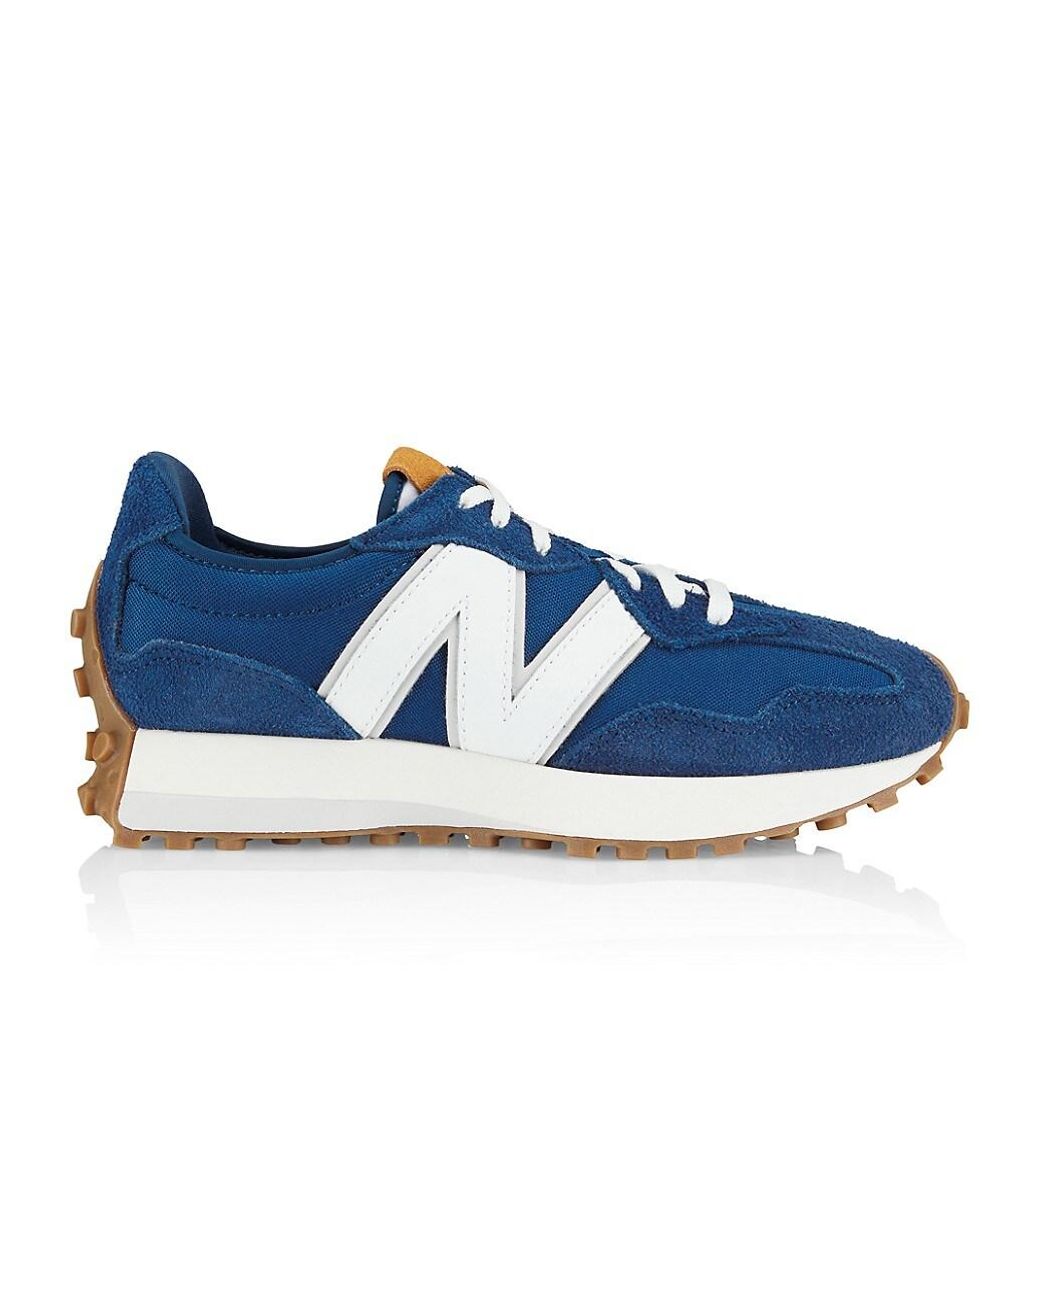 New Balance Classic Comfort 327 Suede Sneakers in Blue | Lyst